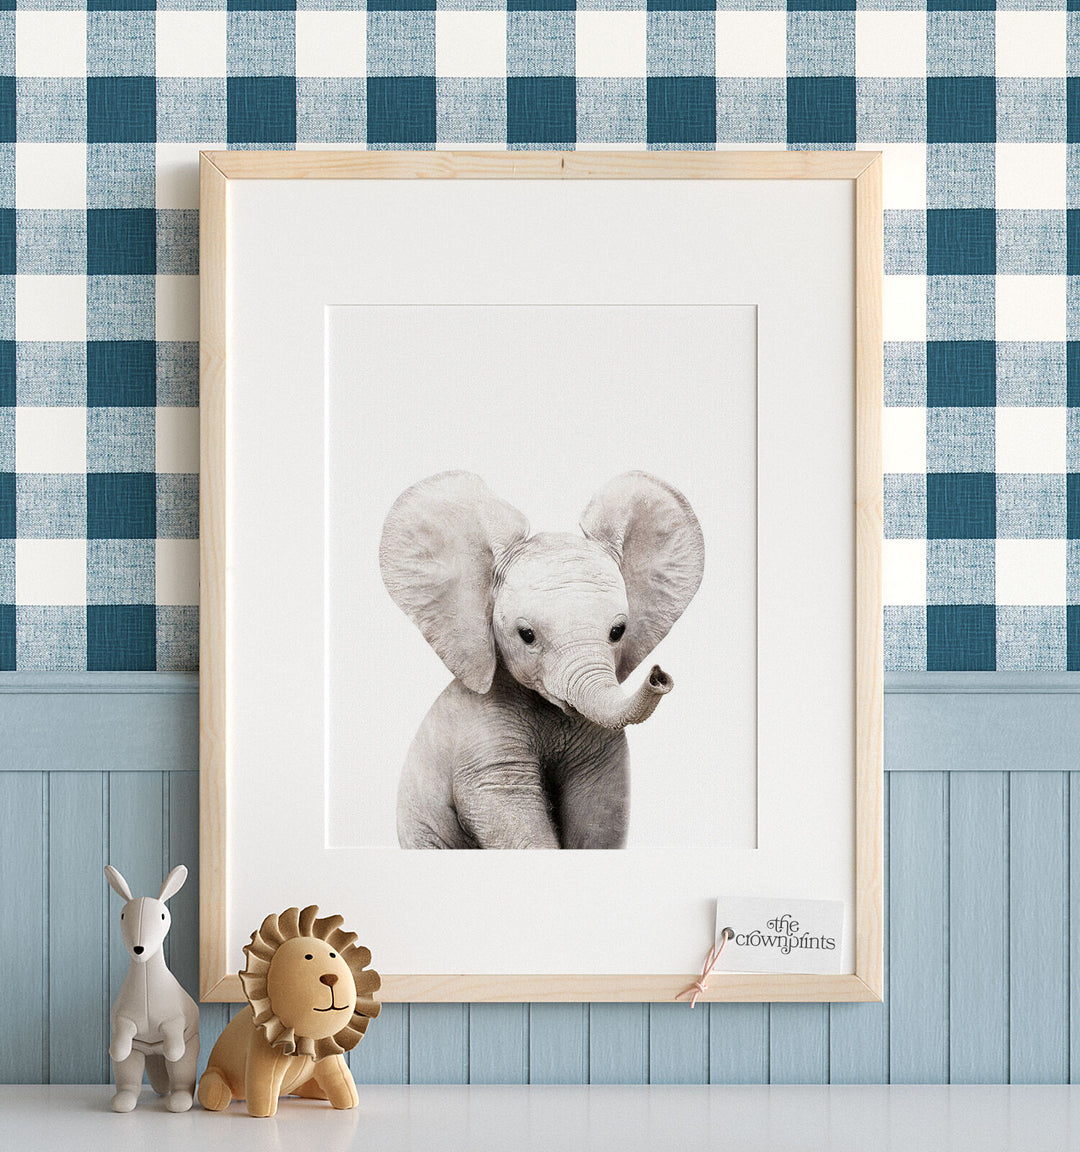 Baby elephant poster with white background in a nursery room